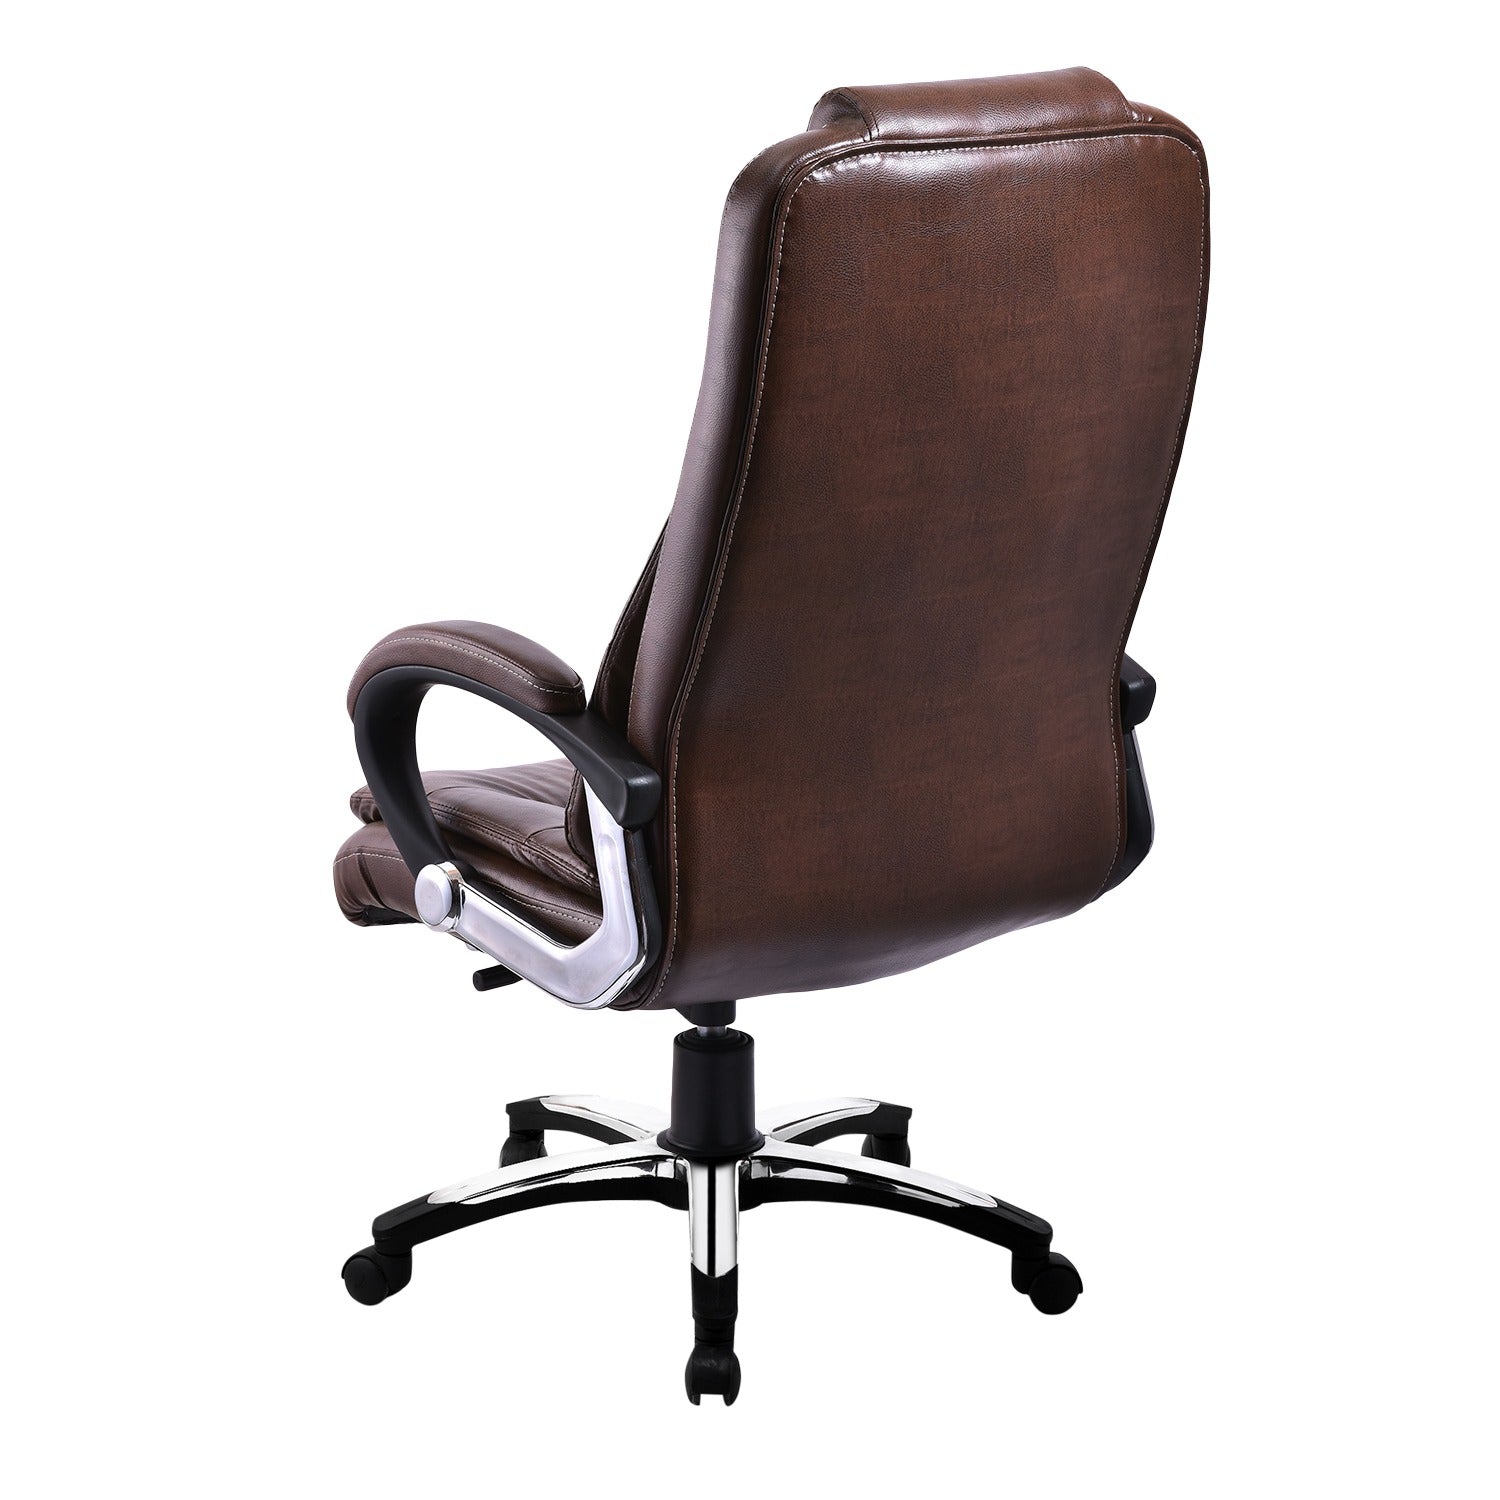 ZSE1036 High Back Chair by Zorin in Brown Color Zorin